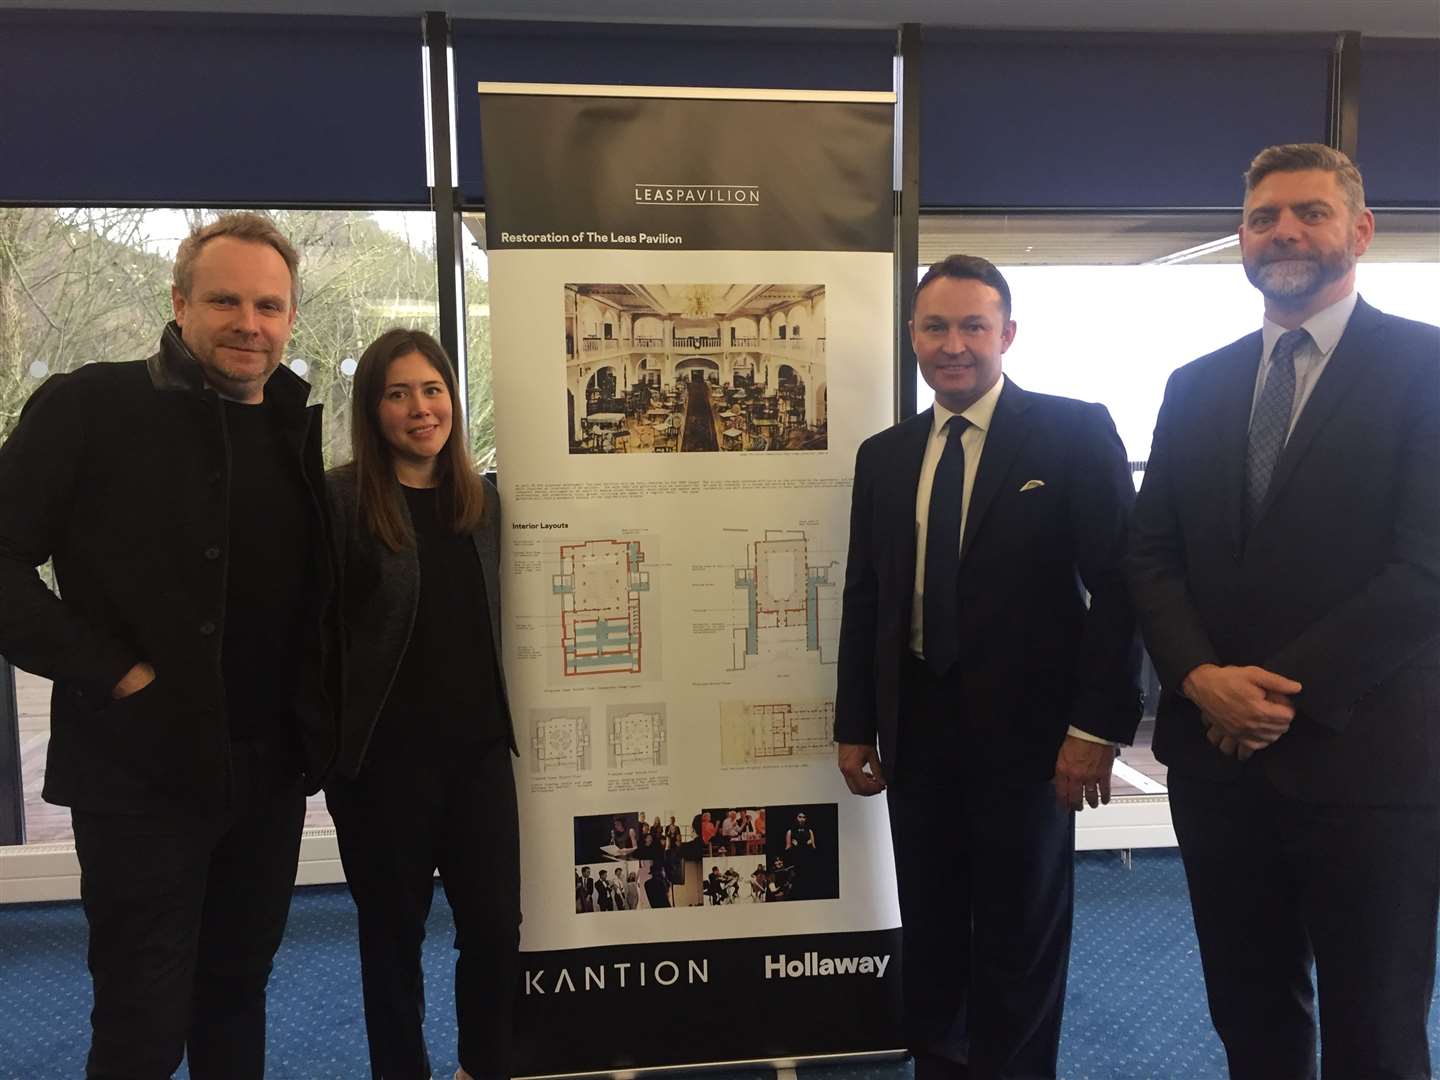 The team behind the news plans: (L-R) architect Guy Hollaway, architect Michelle Earnshaw, Miles MacKinnon from Kantion and Paul Landsberg, planning consultant